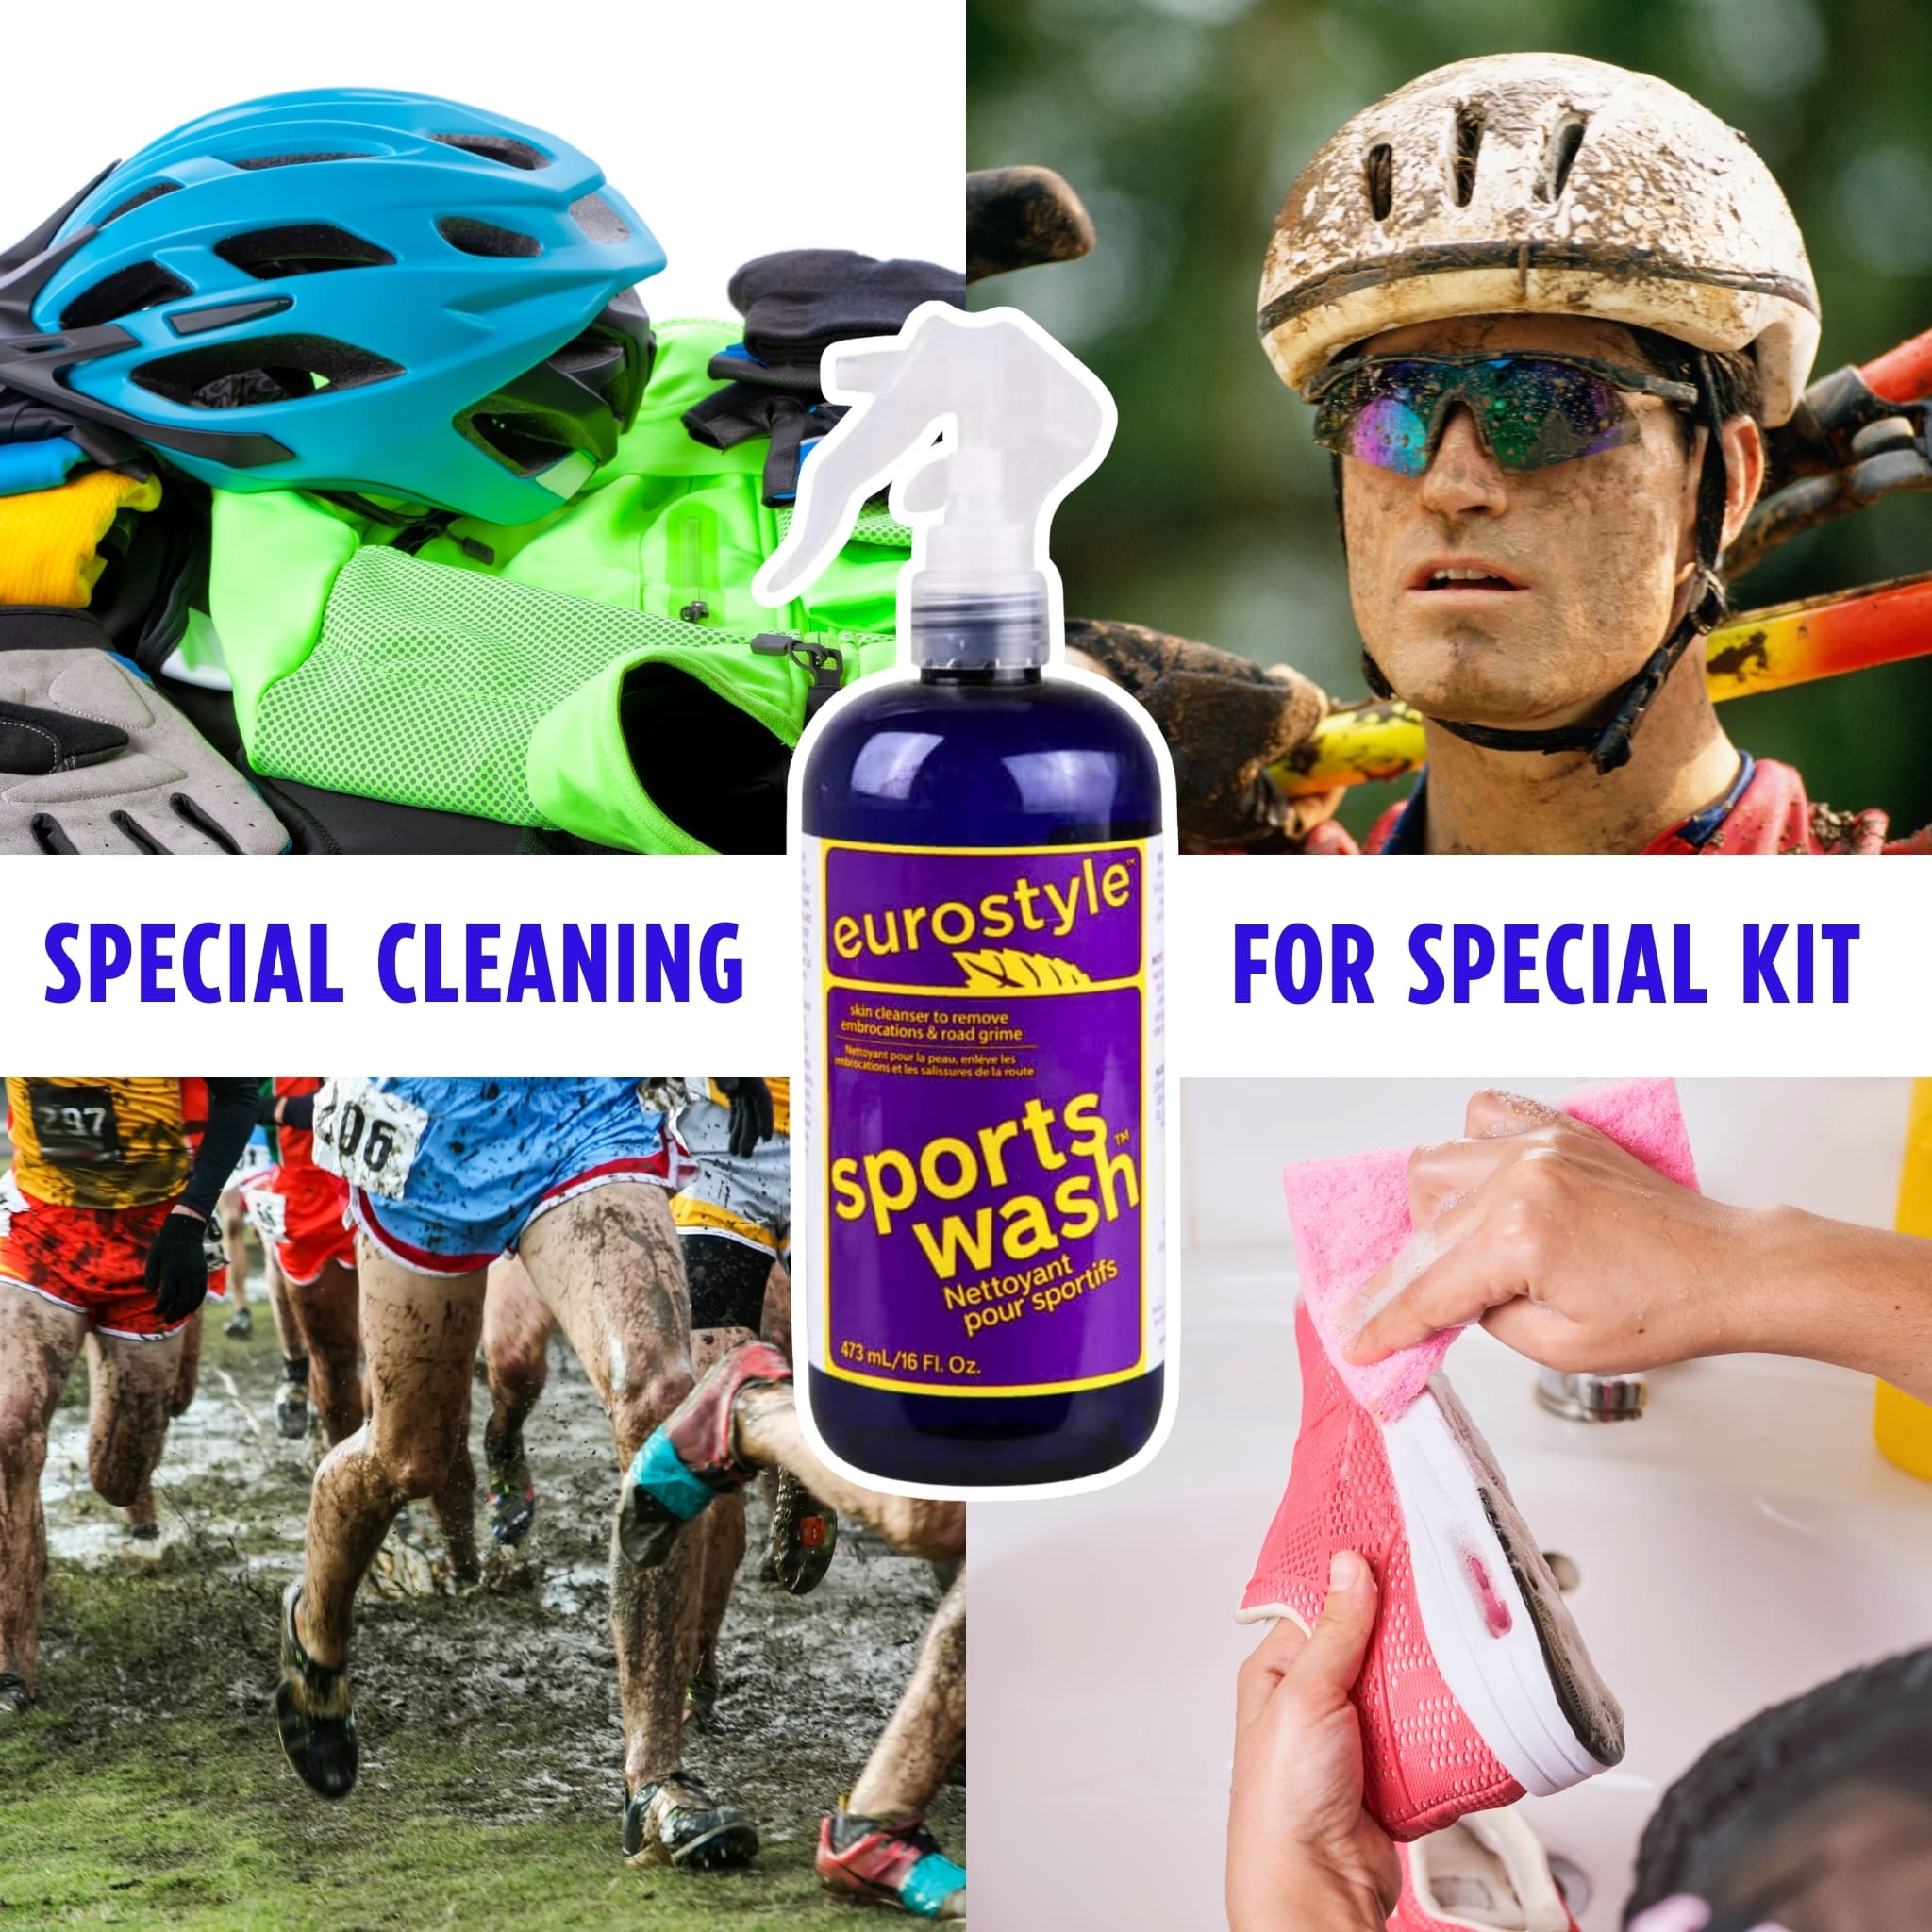 Eurostyle Sports Wash 473 ml spray - Special cleaning for special kit